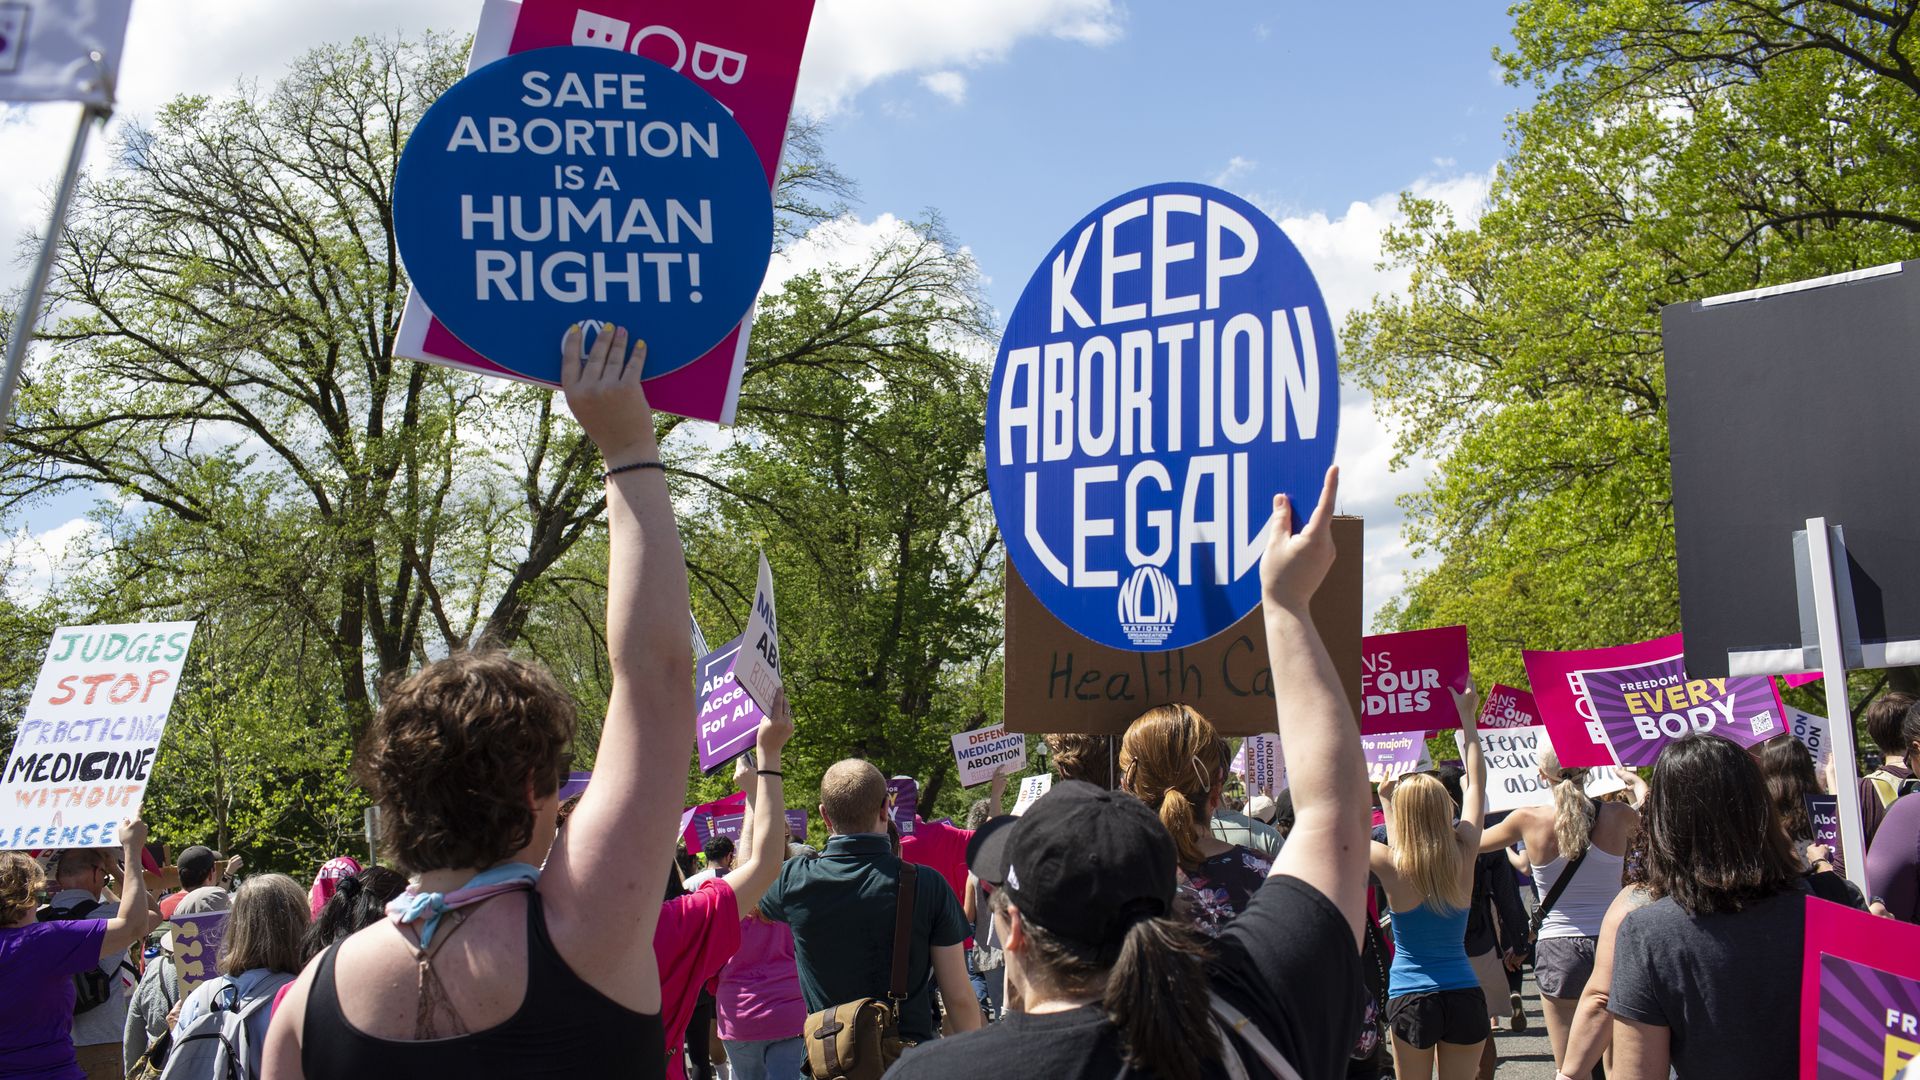 Activists holding abortion rights signs and shout slogans while joining in a rally